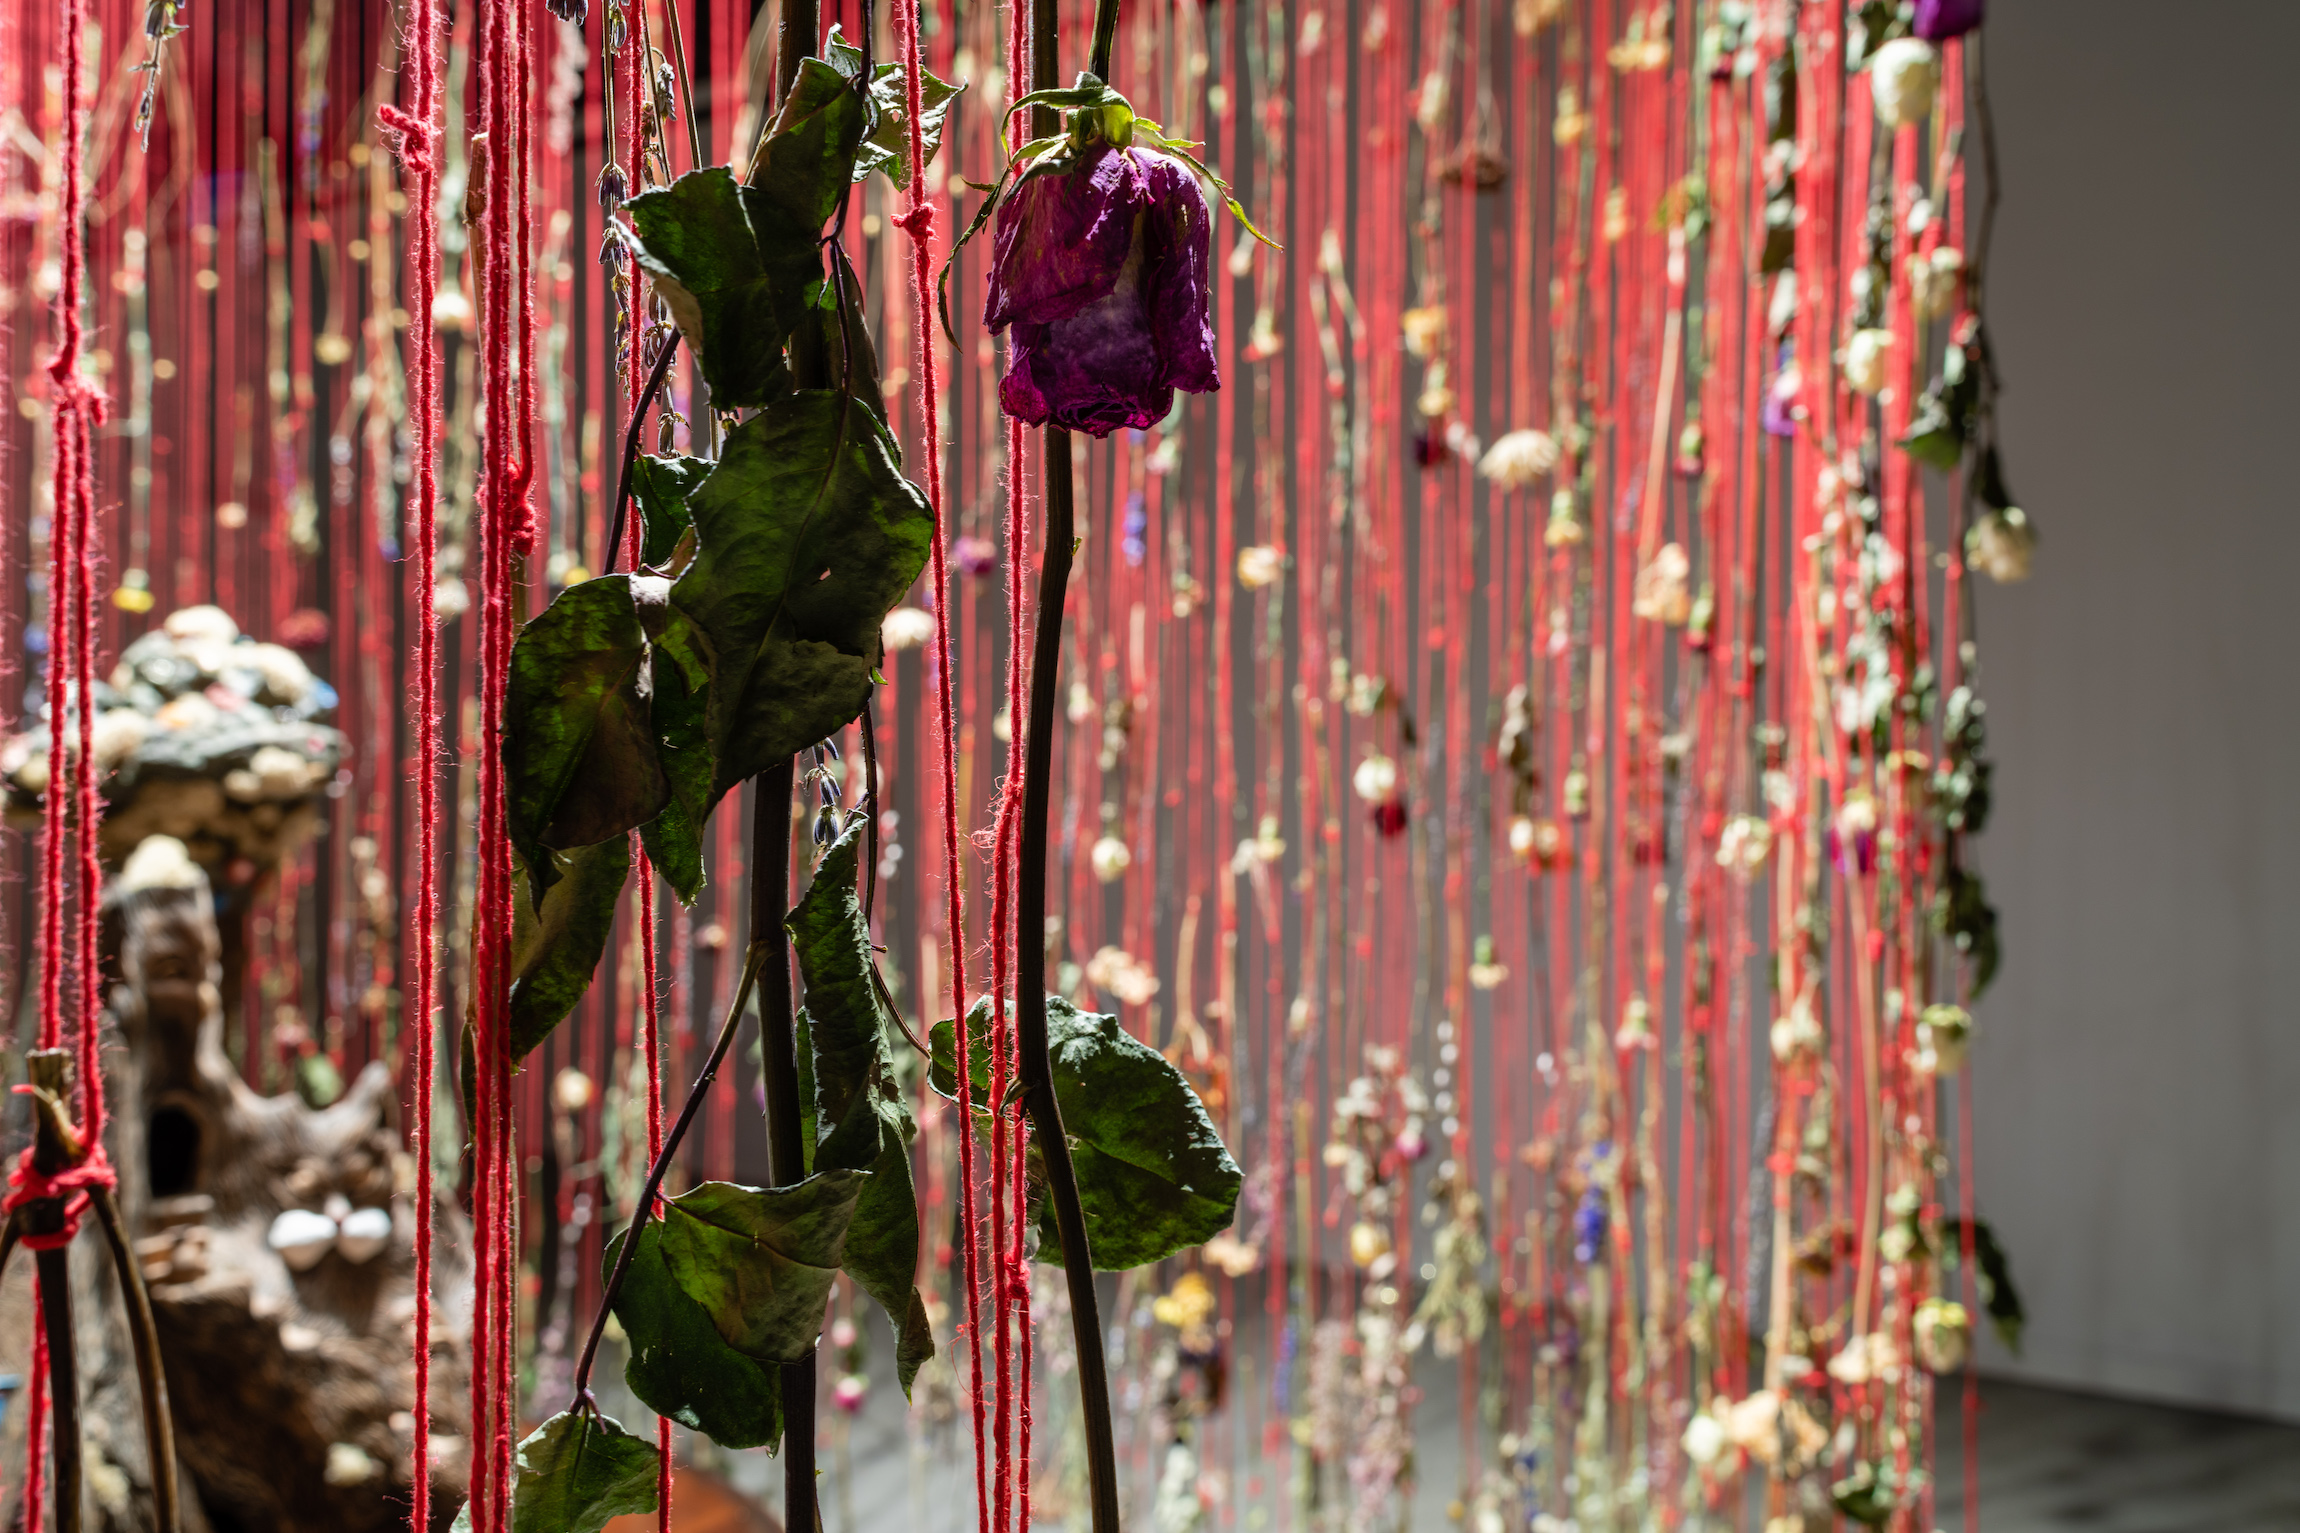 Closeup of the flower veil from Gloriann Langva's Master of Fine Arts exhibition Illusive Charm: Tales of Magic and Dreams at the Art Lofts Gallery, University of Wisconsin-Madison. Photography by Kyle Herrera.